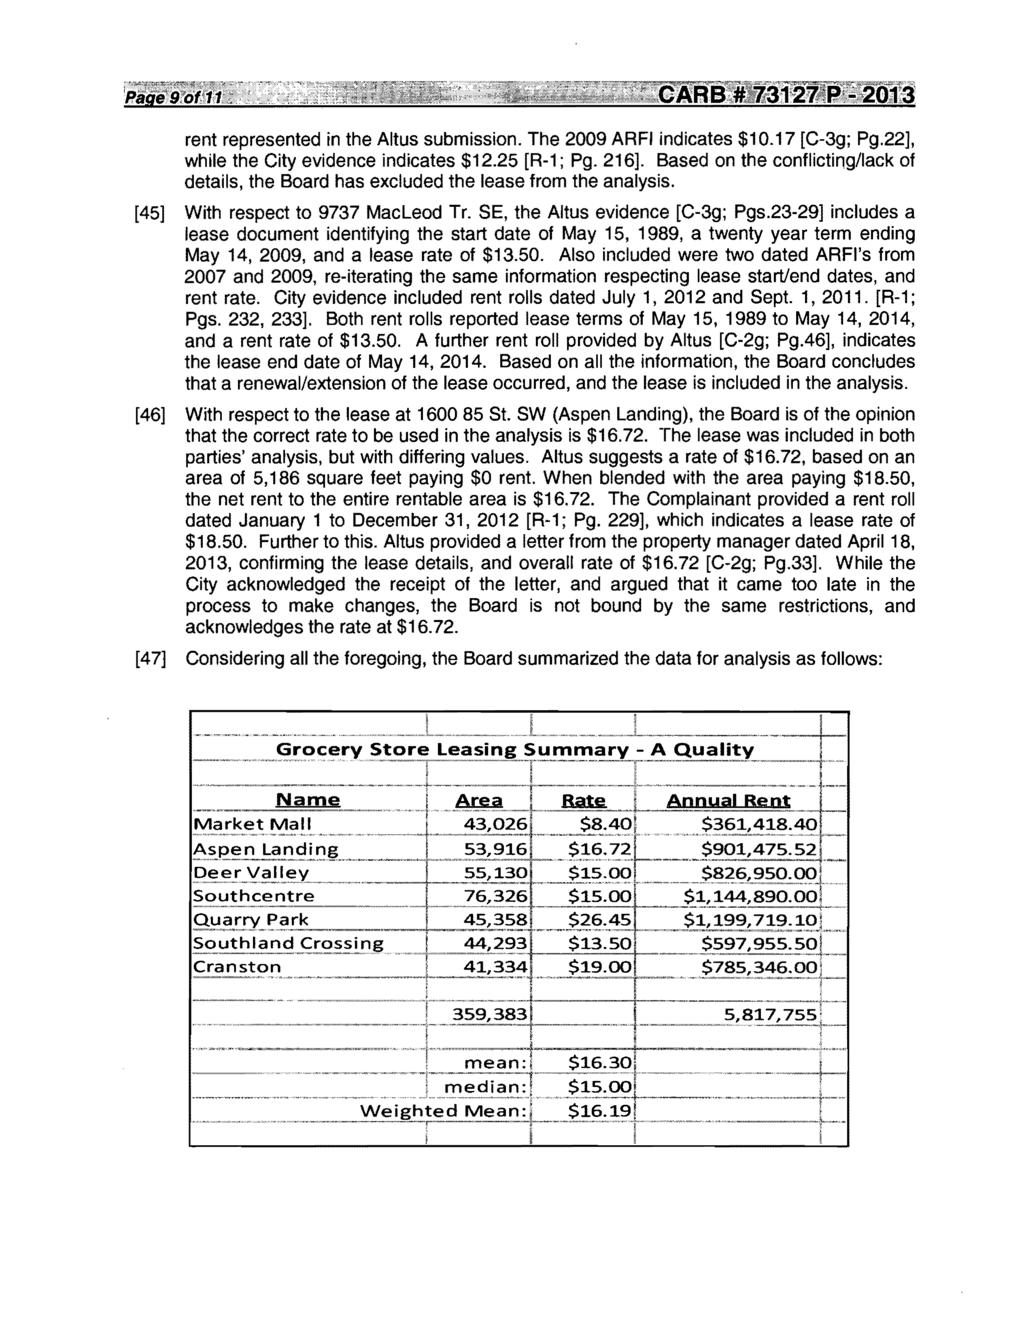 rent represented in the Altus submission. The 2009 ARFI indicates $10.17 [C-3g; Pg.22], while the City evidence indicates $12.25 [R-1; Pg. 216].